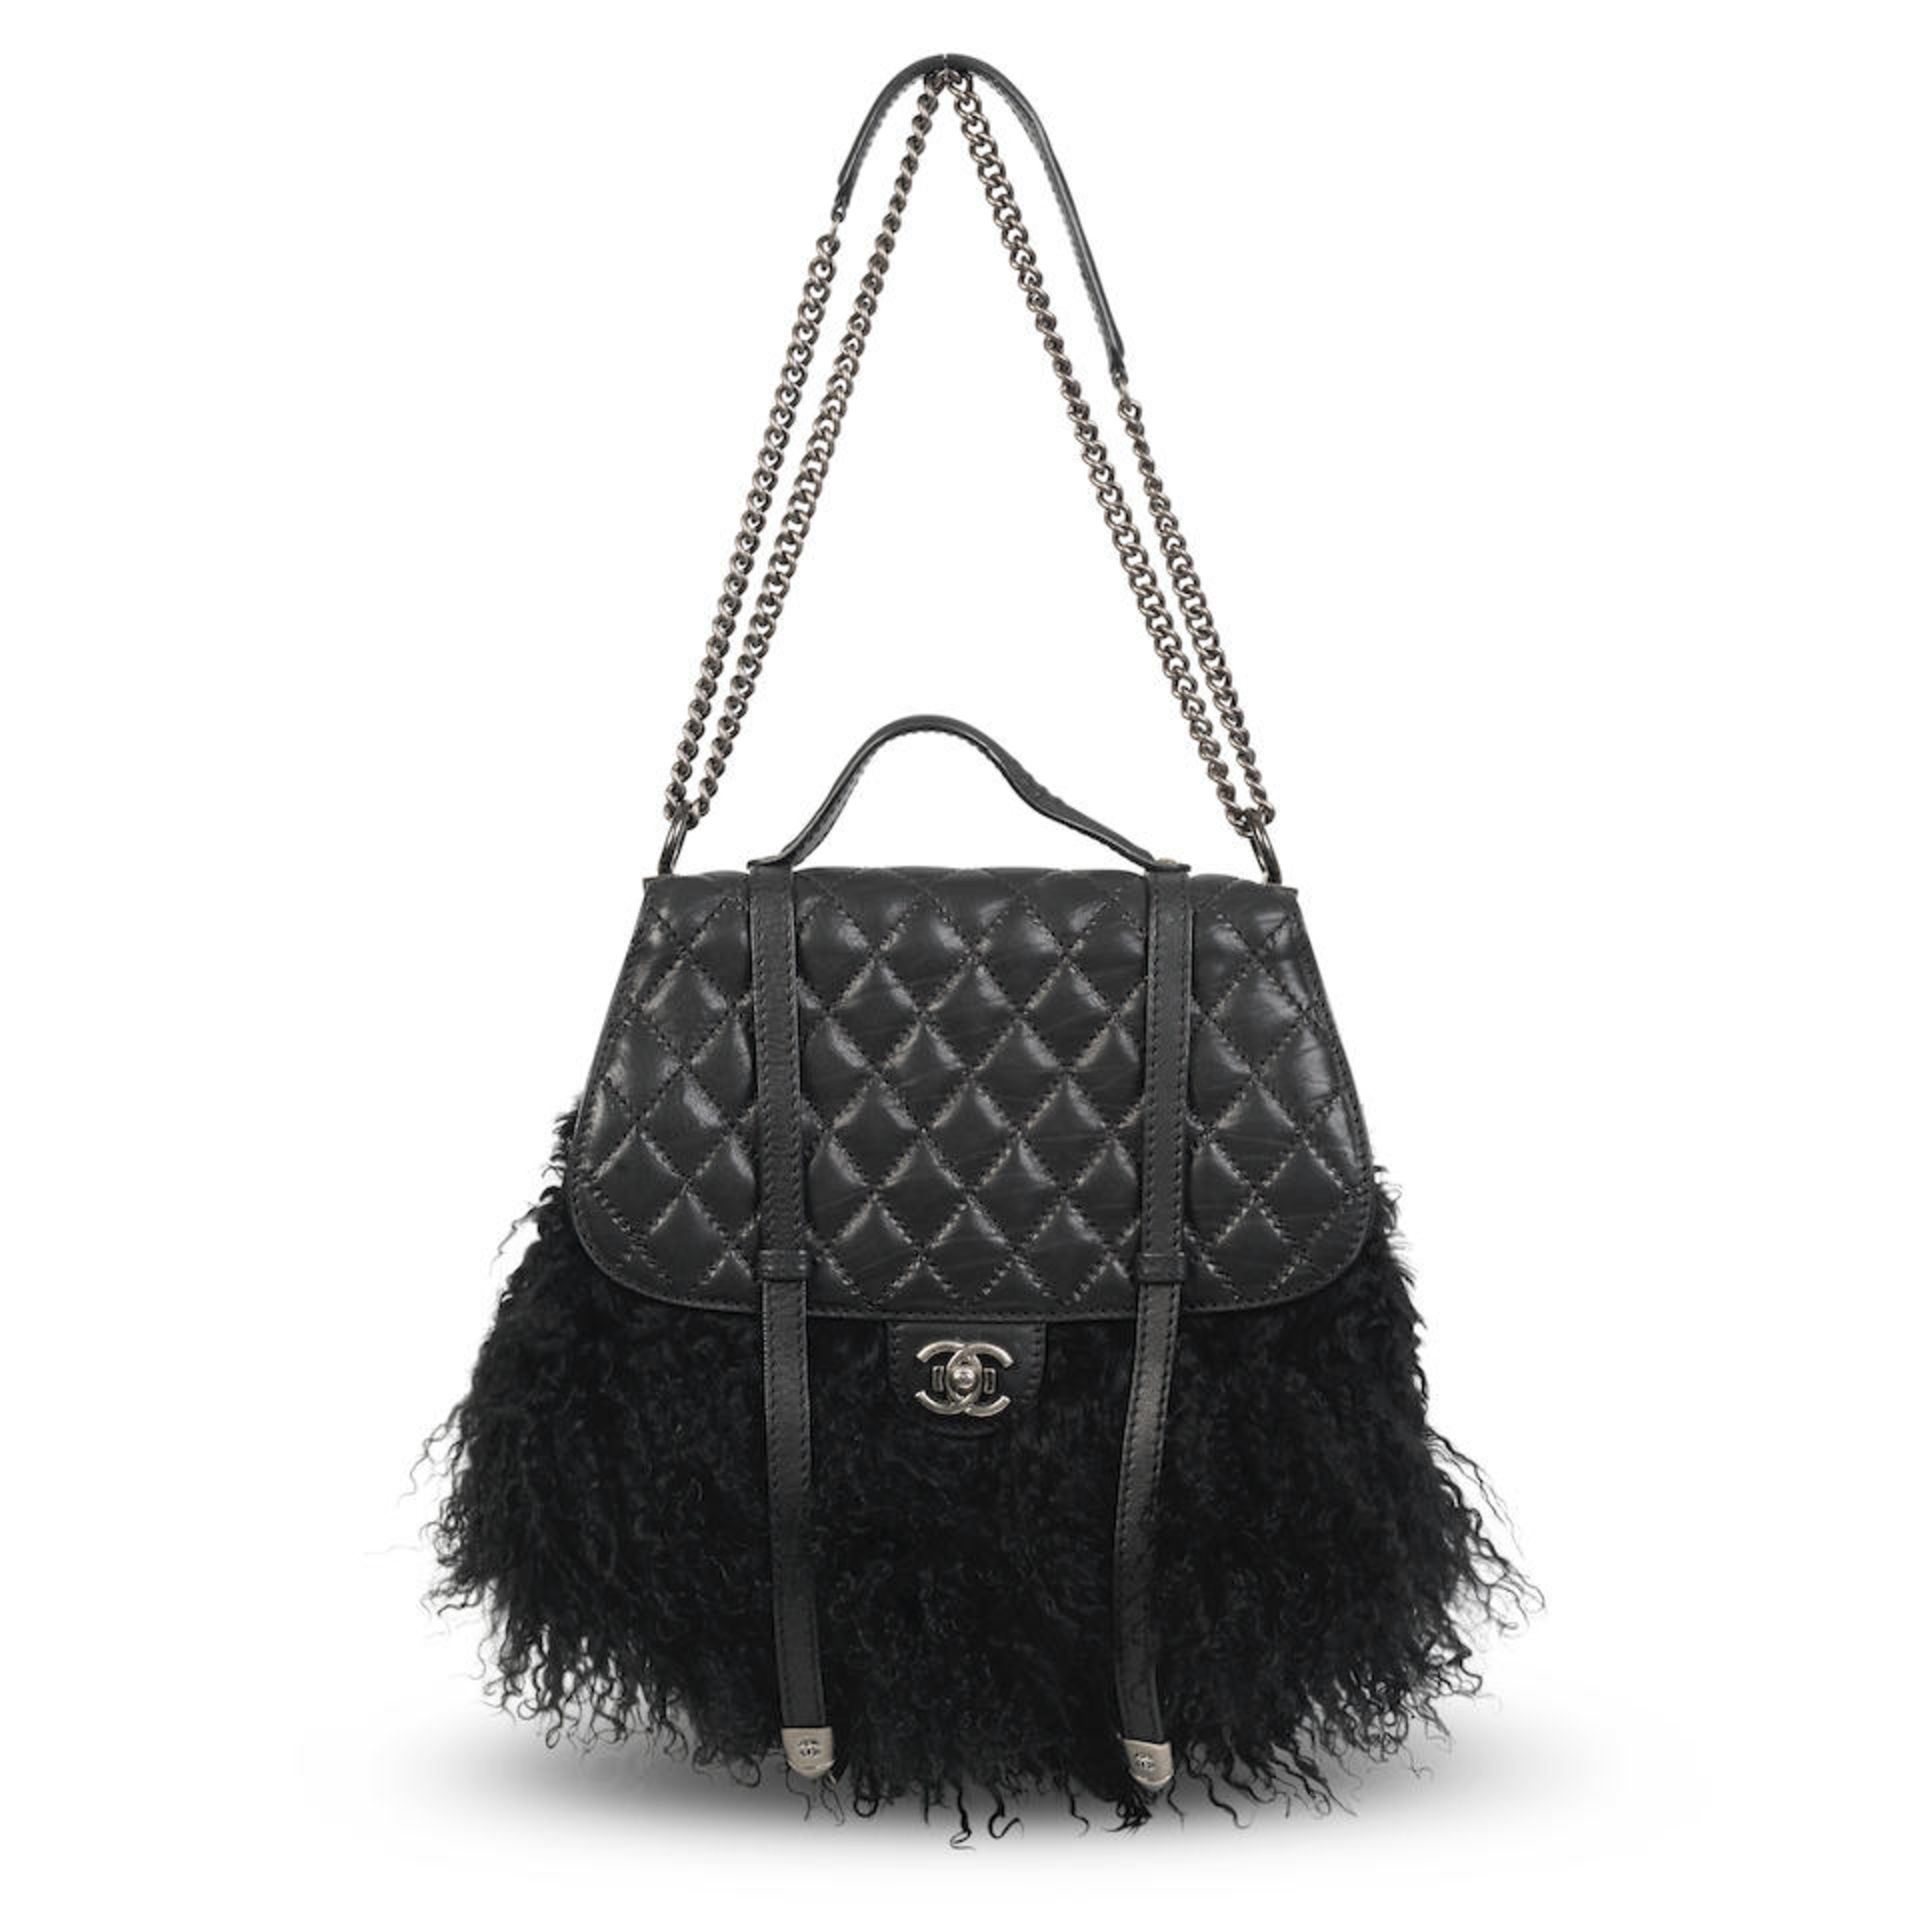 Karl Lagerfeld for Chanel: a Black Quilted Calfskin and Mongolian Lamb Fur Saddle Bag Paris-Dall...